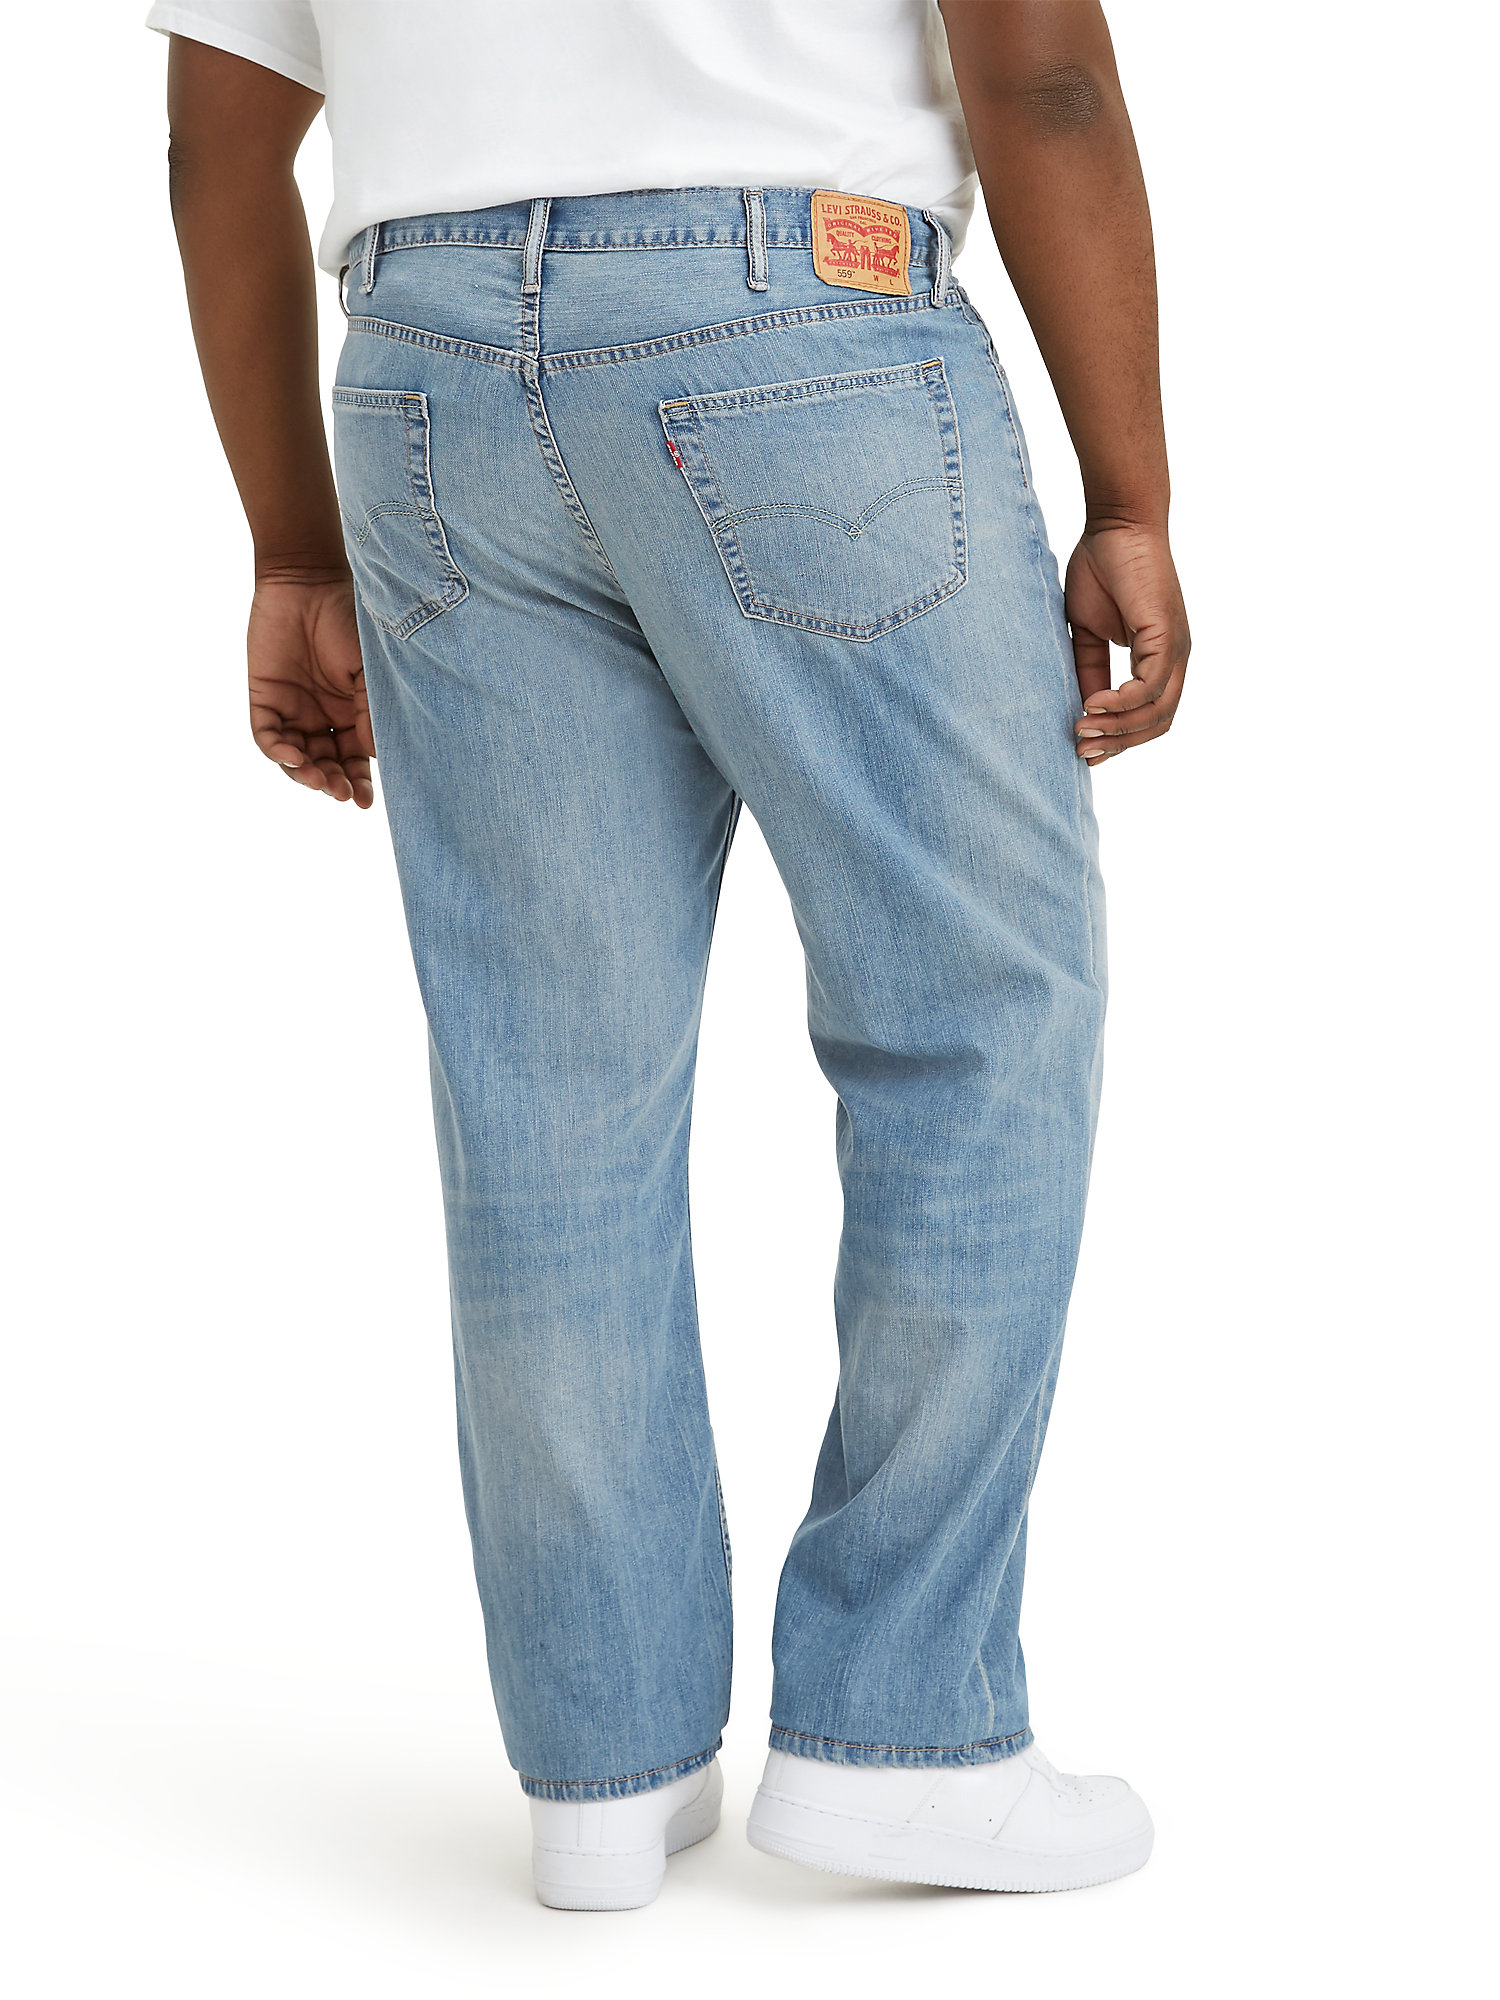 Levi's Men's Big & Tall 559 Relaxed Straight Jeans - image 4 of 5